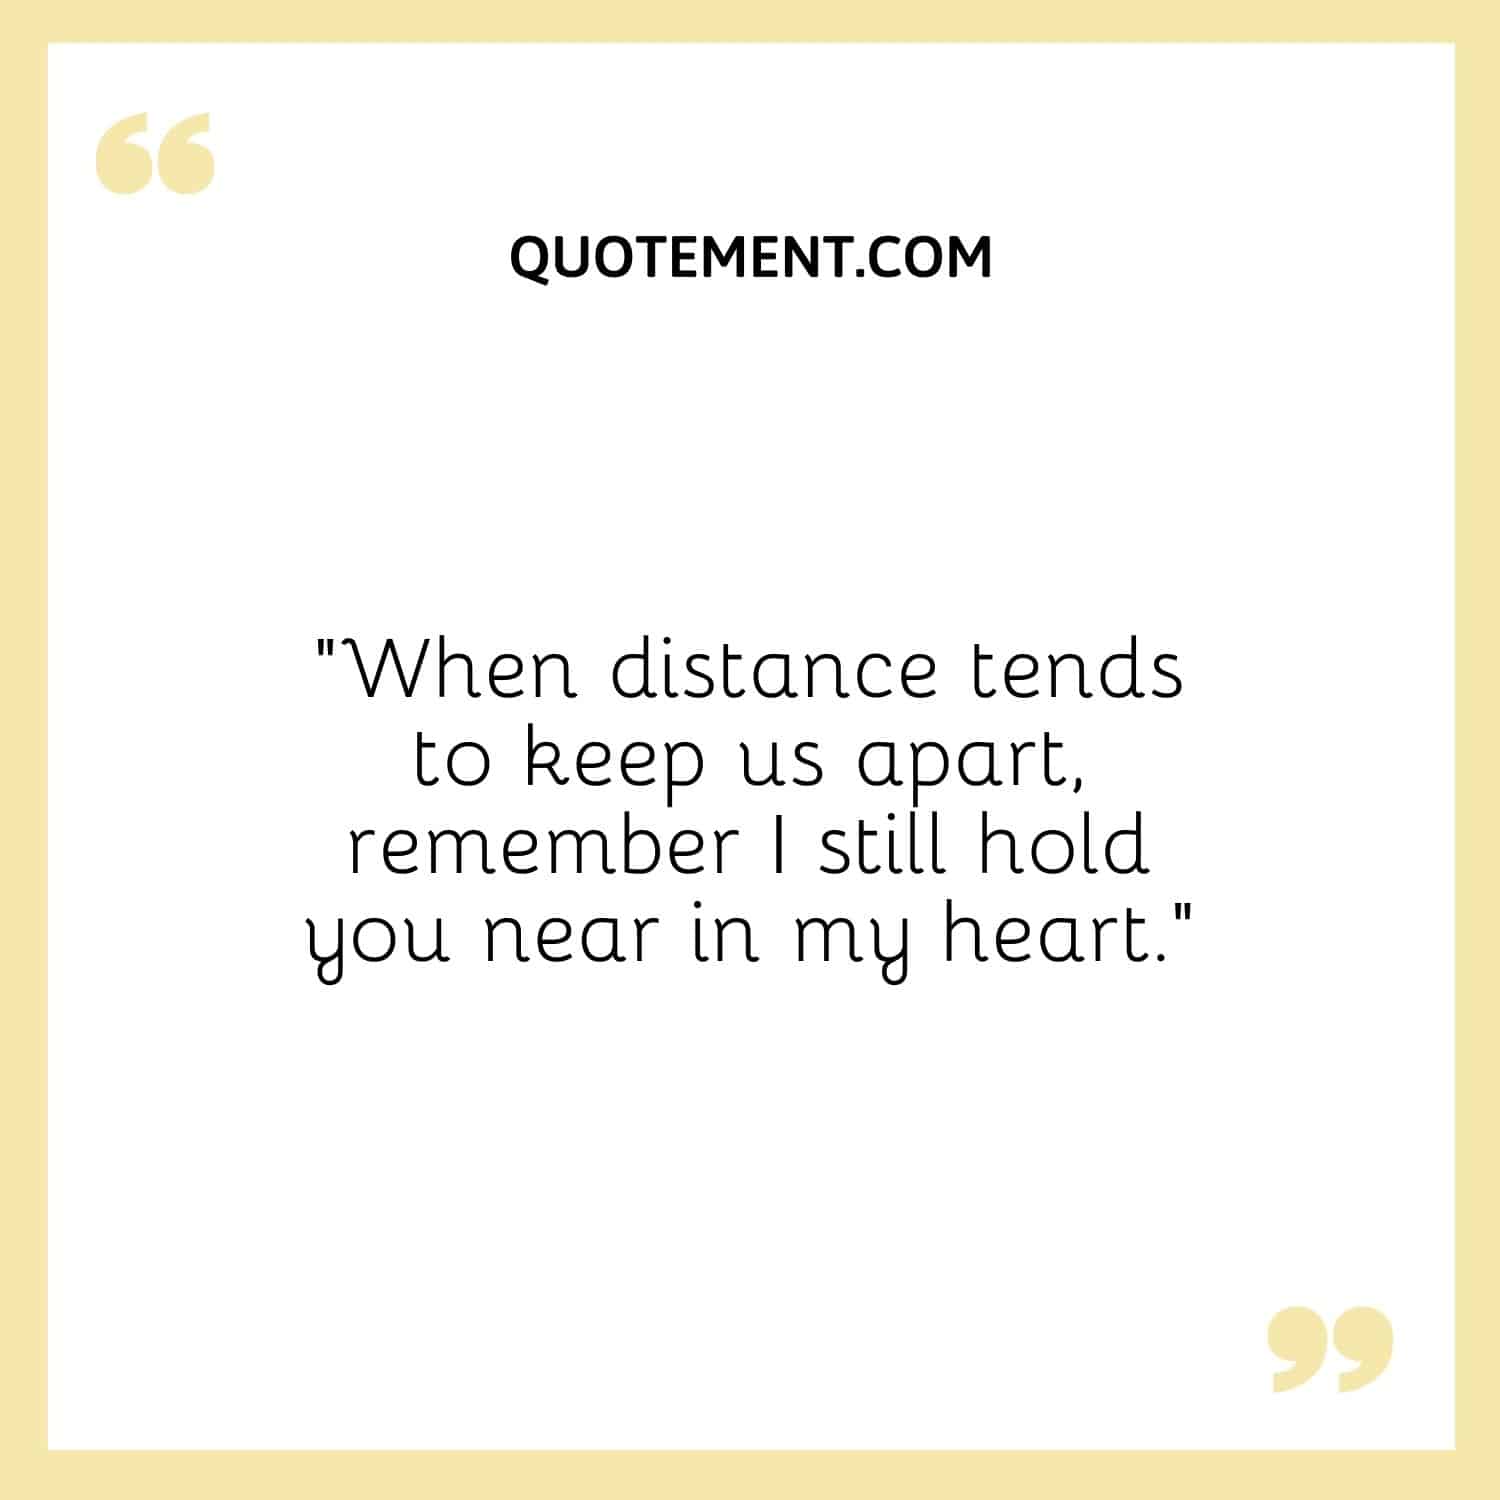 “When distance tends to keep us apart, remember I still hold you near in my heart.”